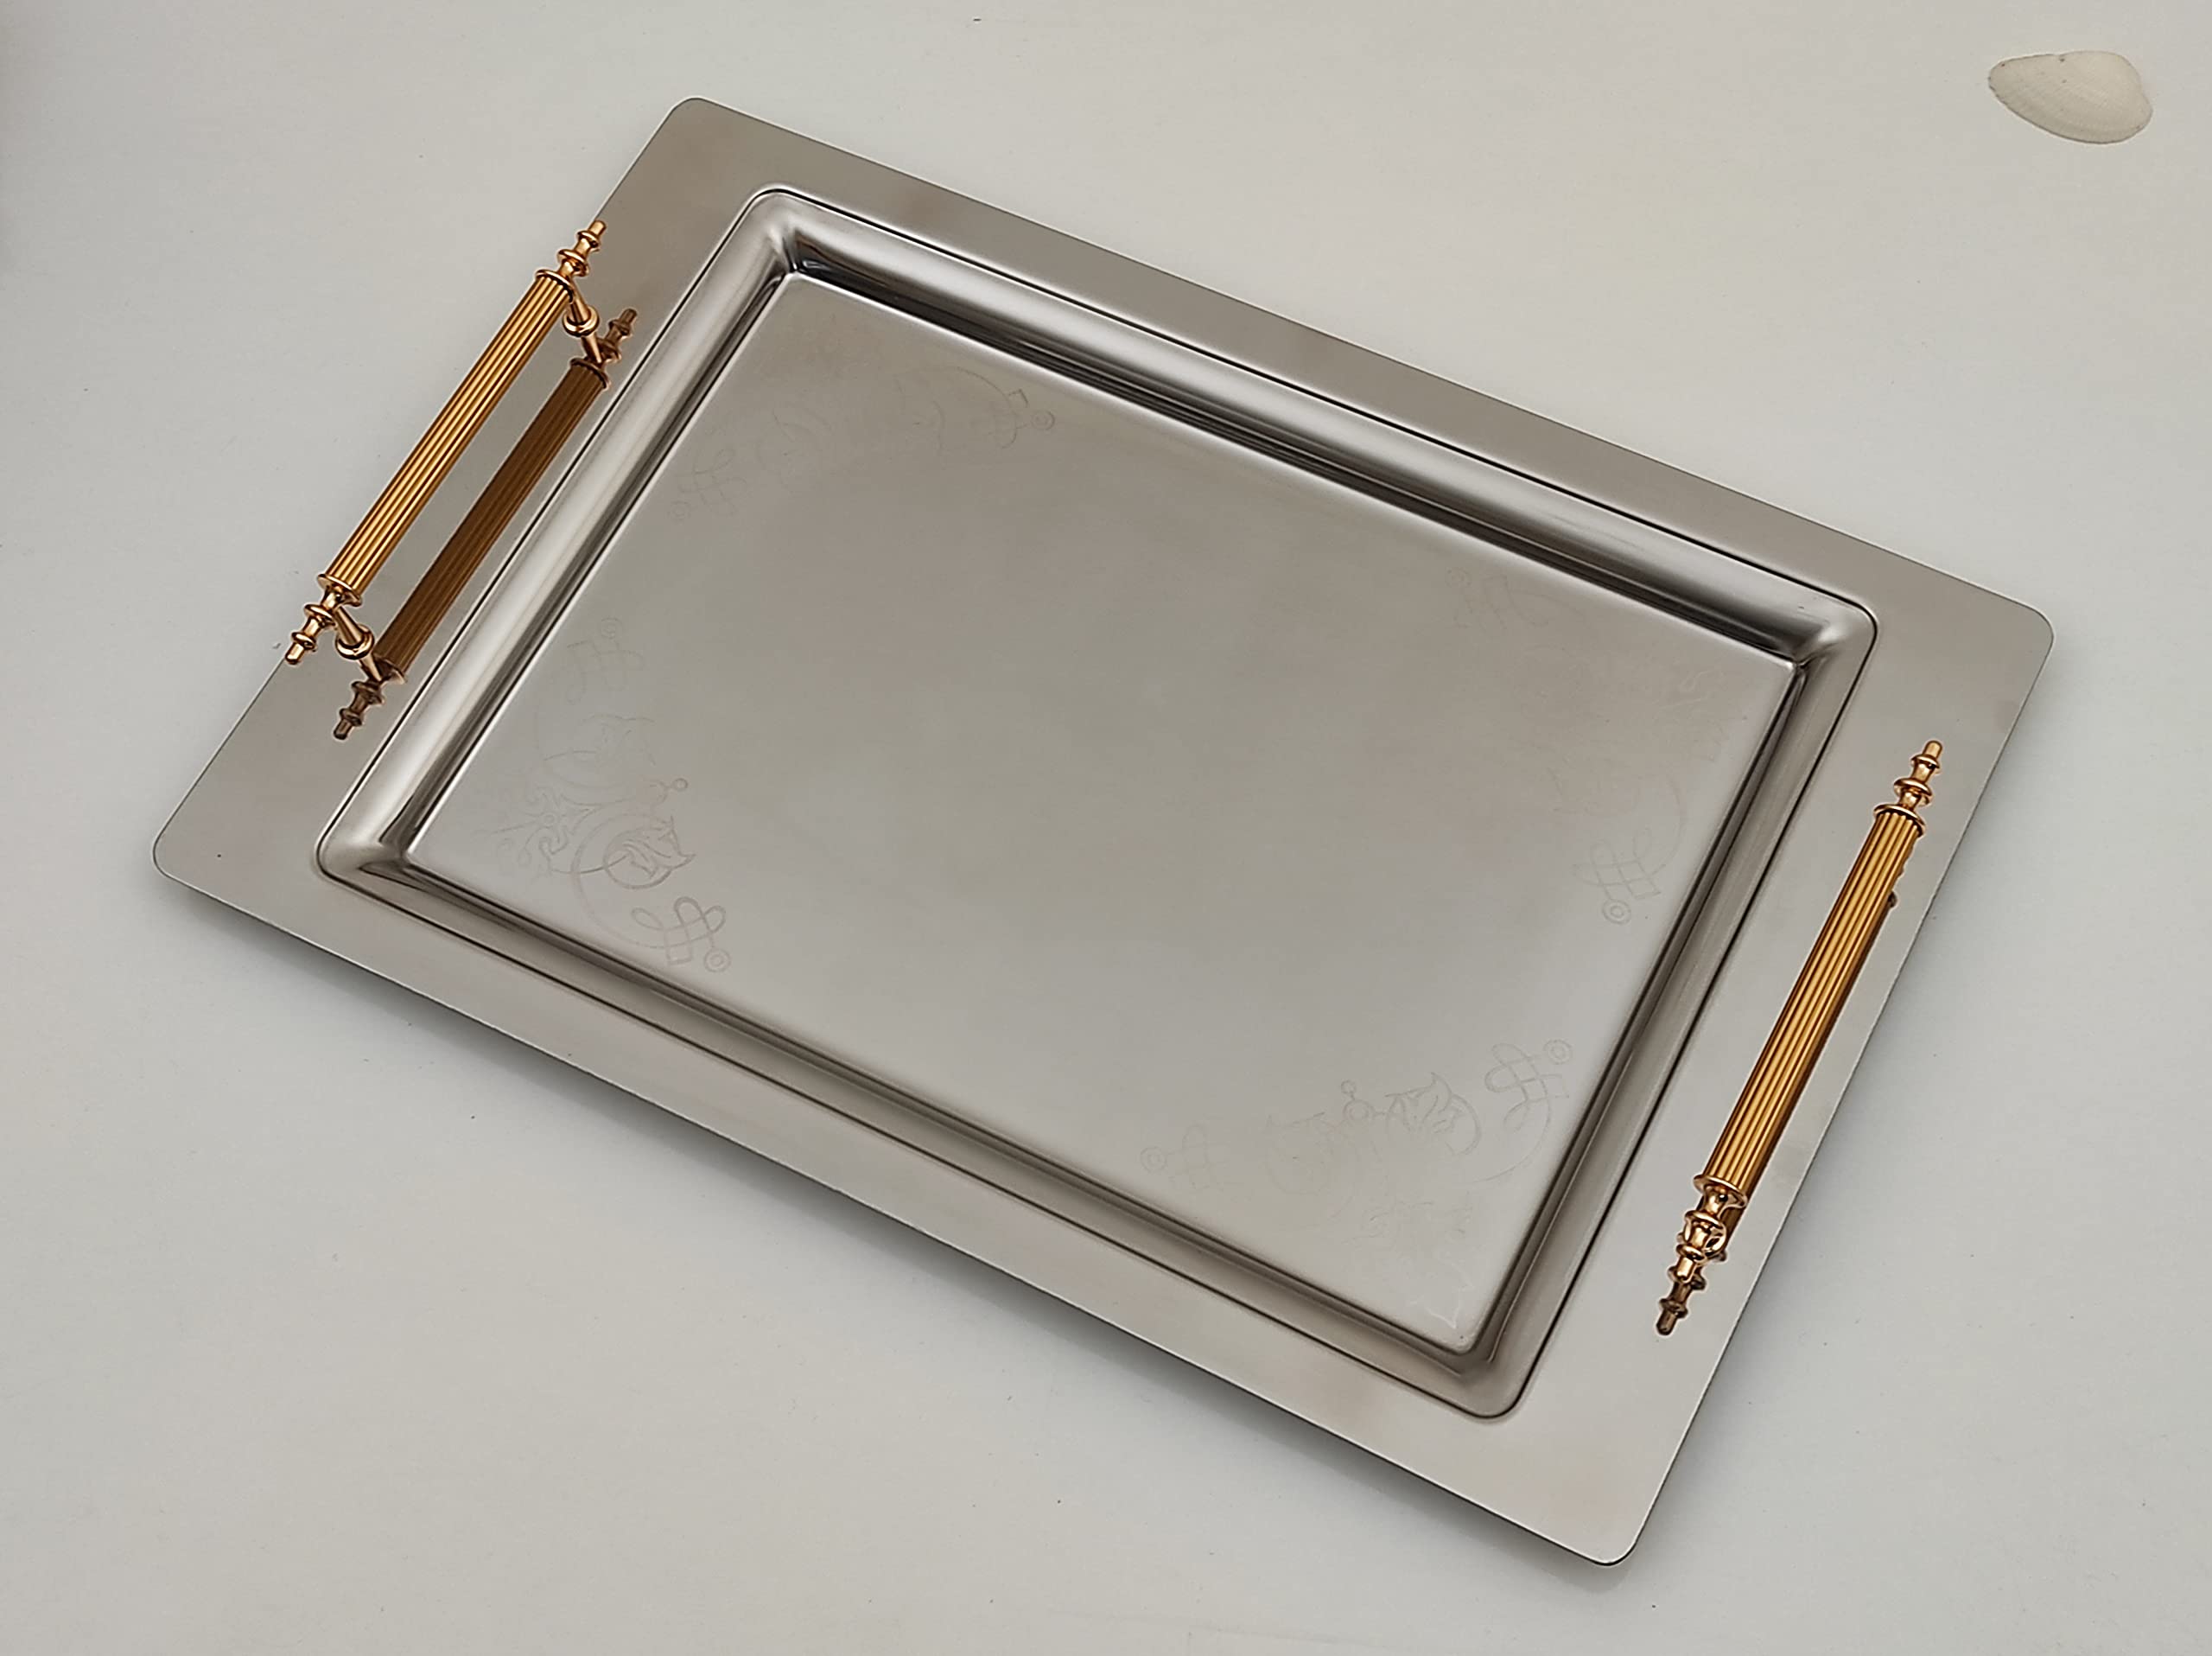 Candymosa Silver Serving Tray with Handles (18”x12”) - Stainless Steel Serving Tray for Drinks and Food - Silver Tray Decorative - Ideal as a Coffee Tray, Bar Tray, Silver Platter or Turkish Tray